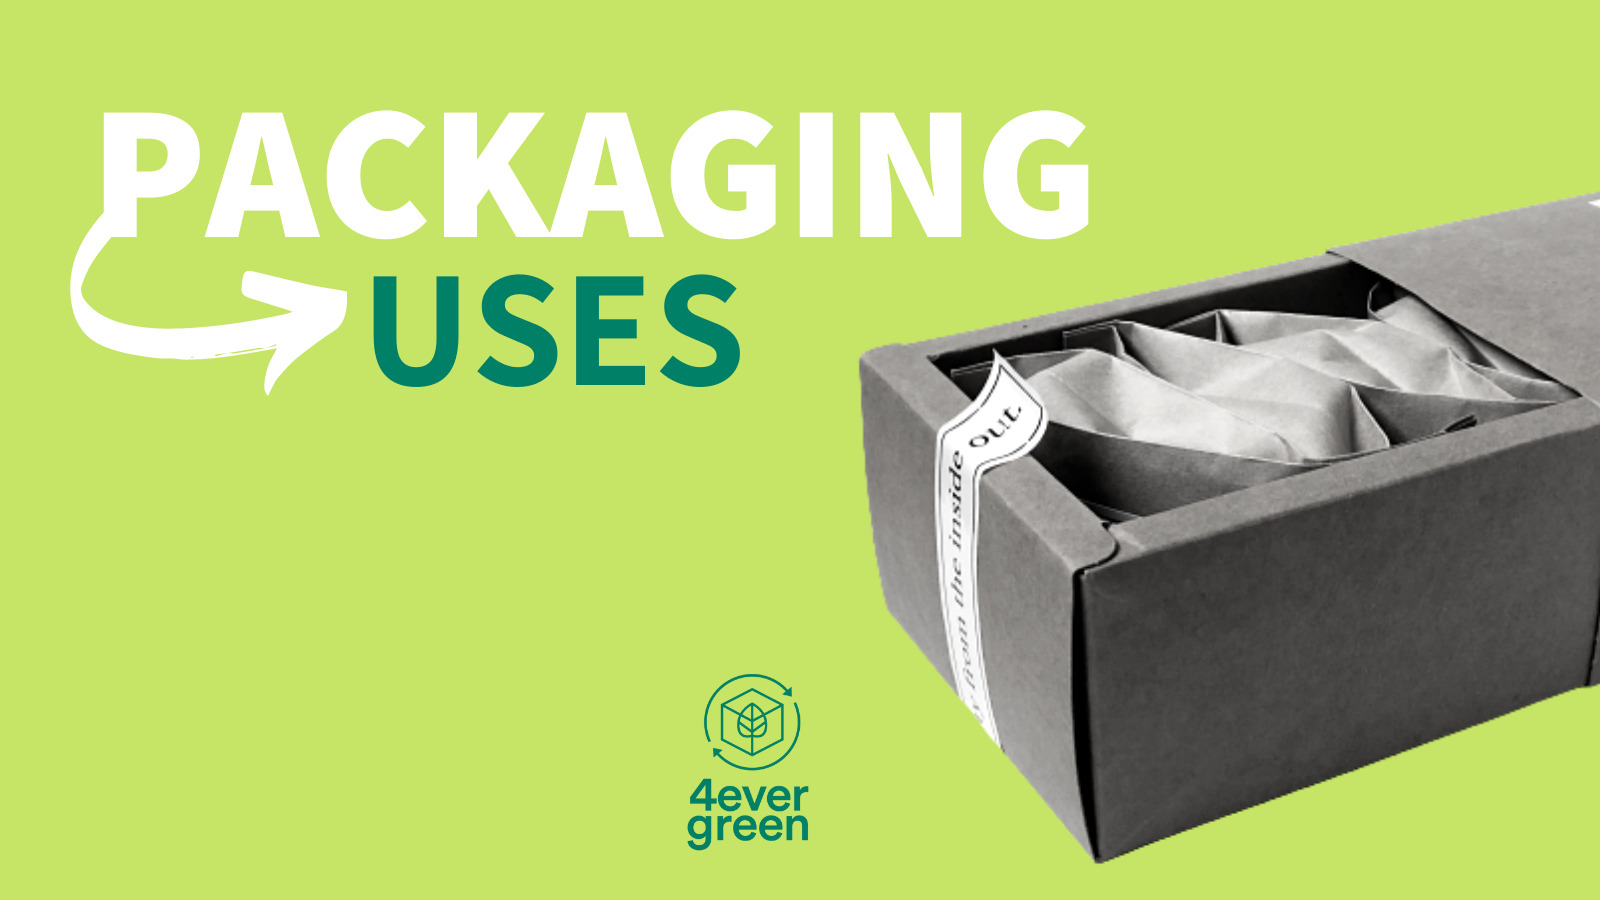 Fibre-based: the future of packaging? - 4evergreen